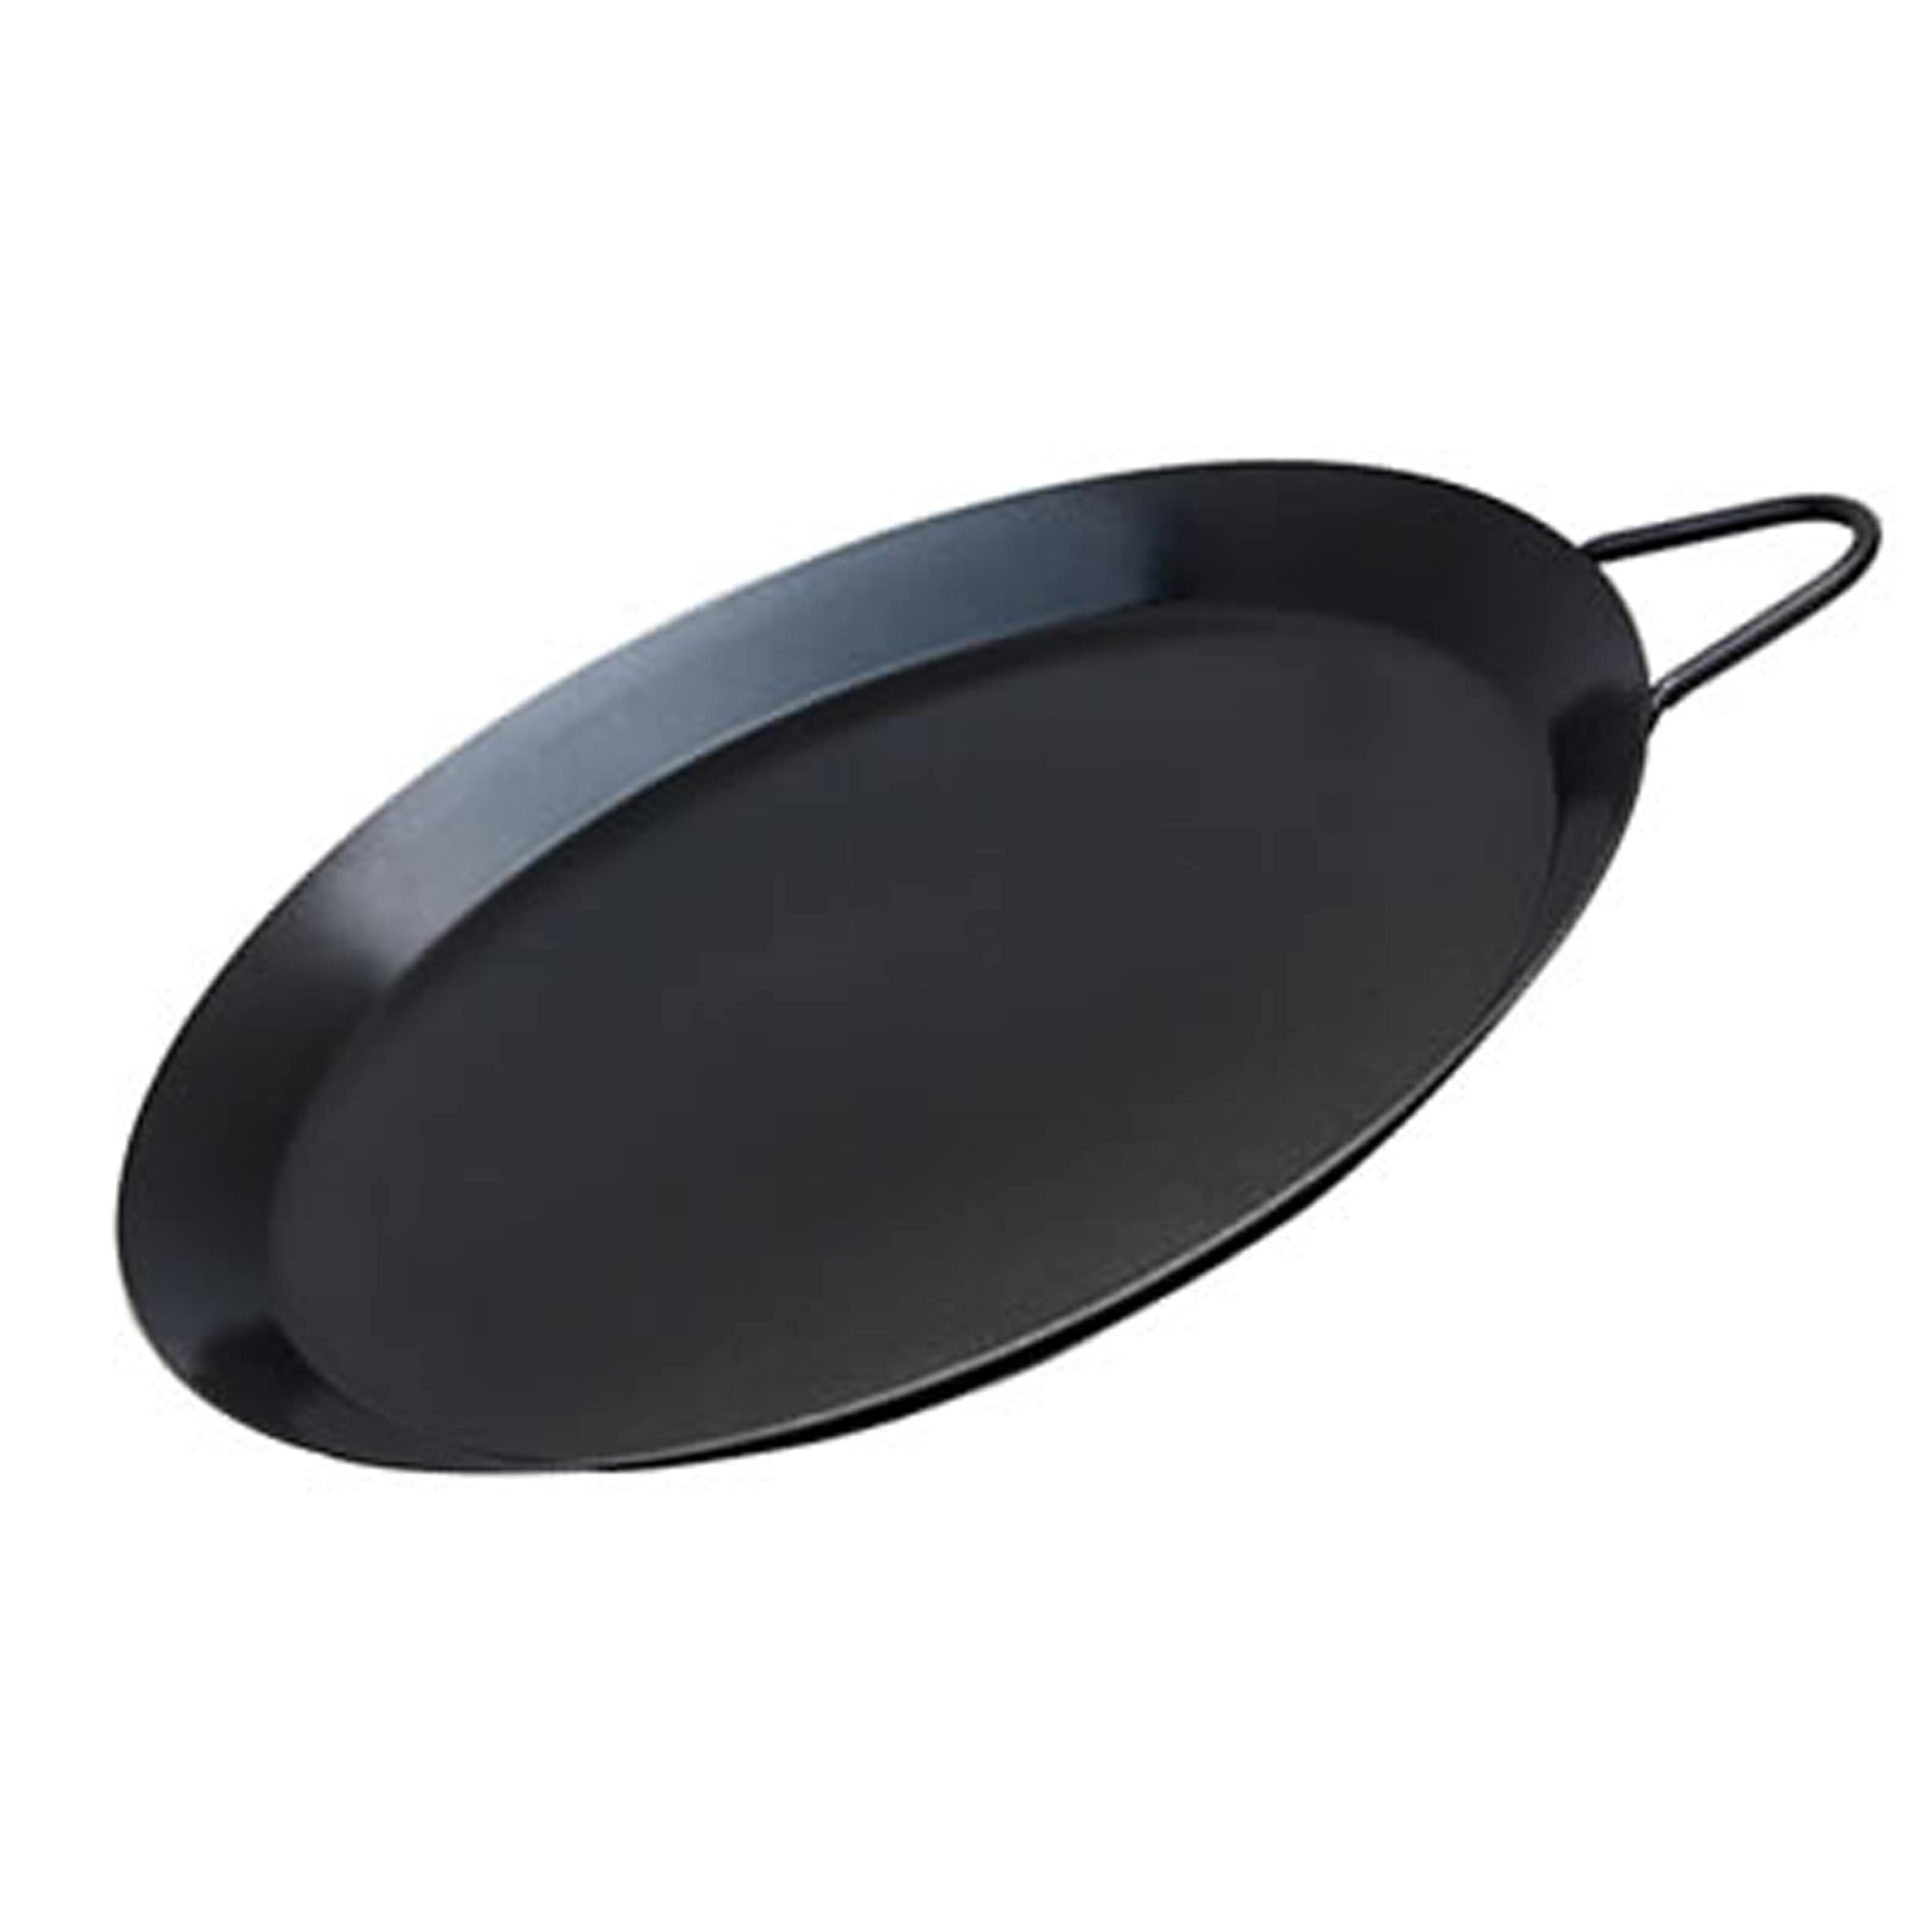 https://ak1.ostkcdn.com/images/products/is/images/direct/081a1bcf1e20b0e1493a165f5ad49adc1e60ea53/Brentwood-9.5-Round-Griddle-%28Comal%29.jpg